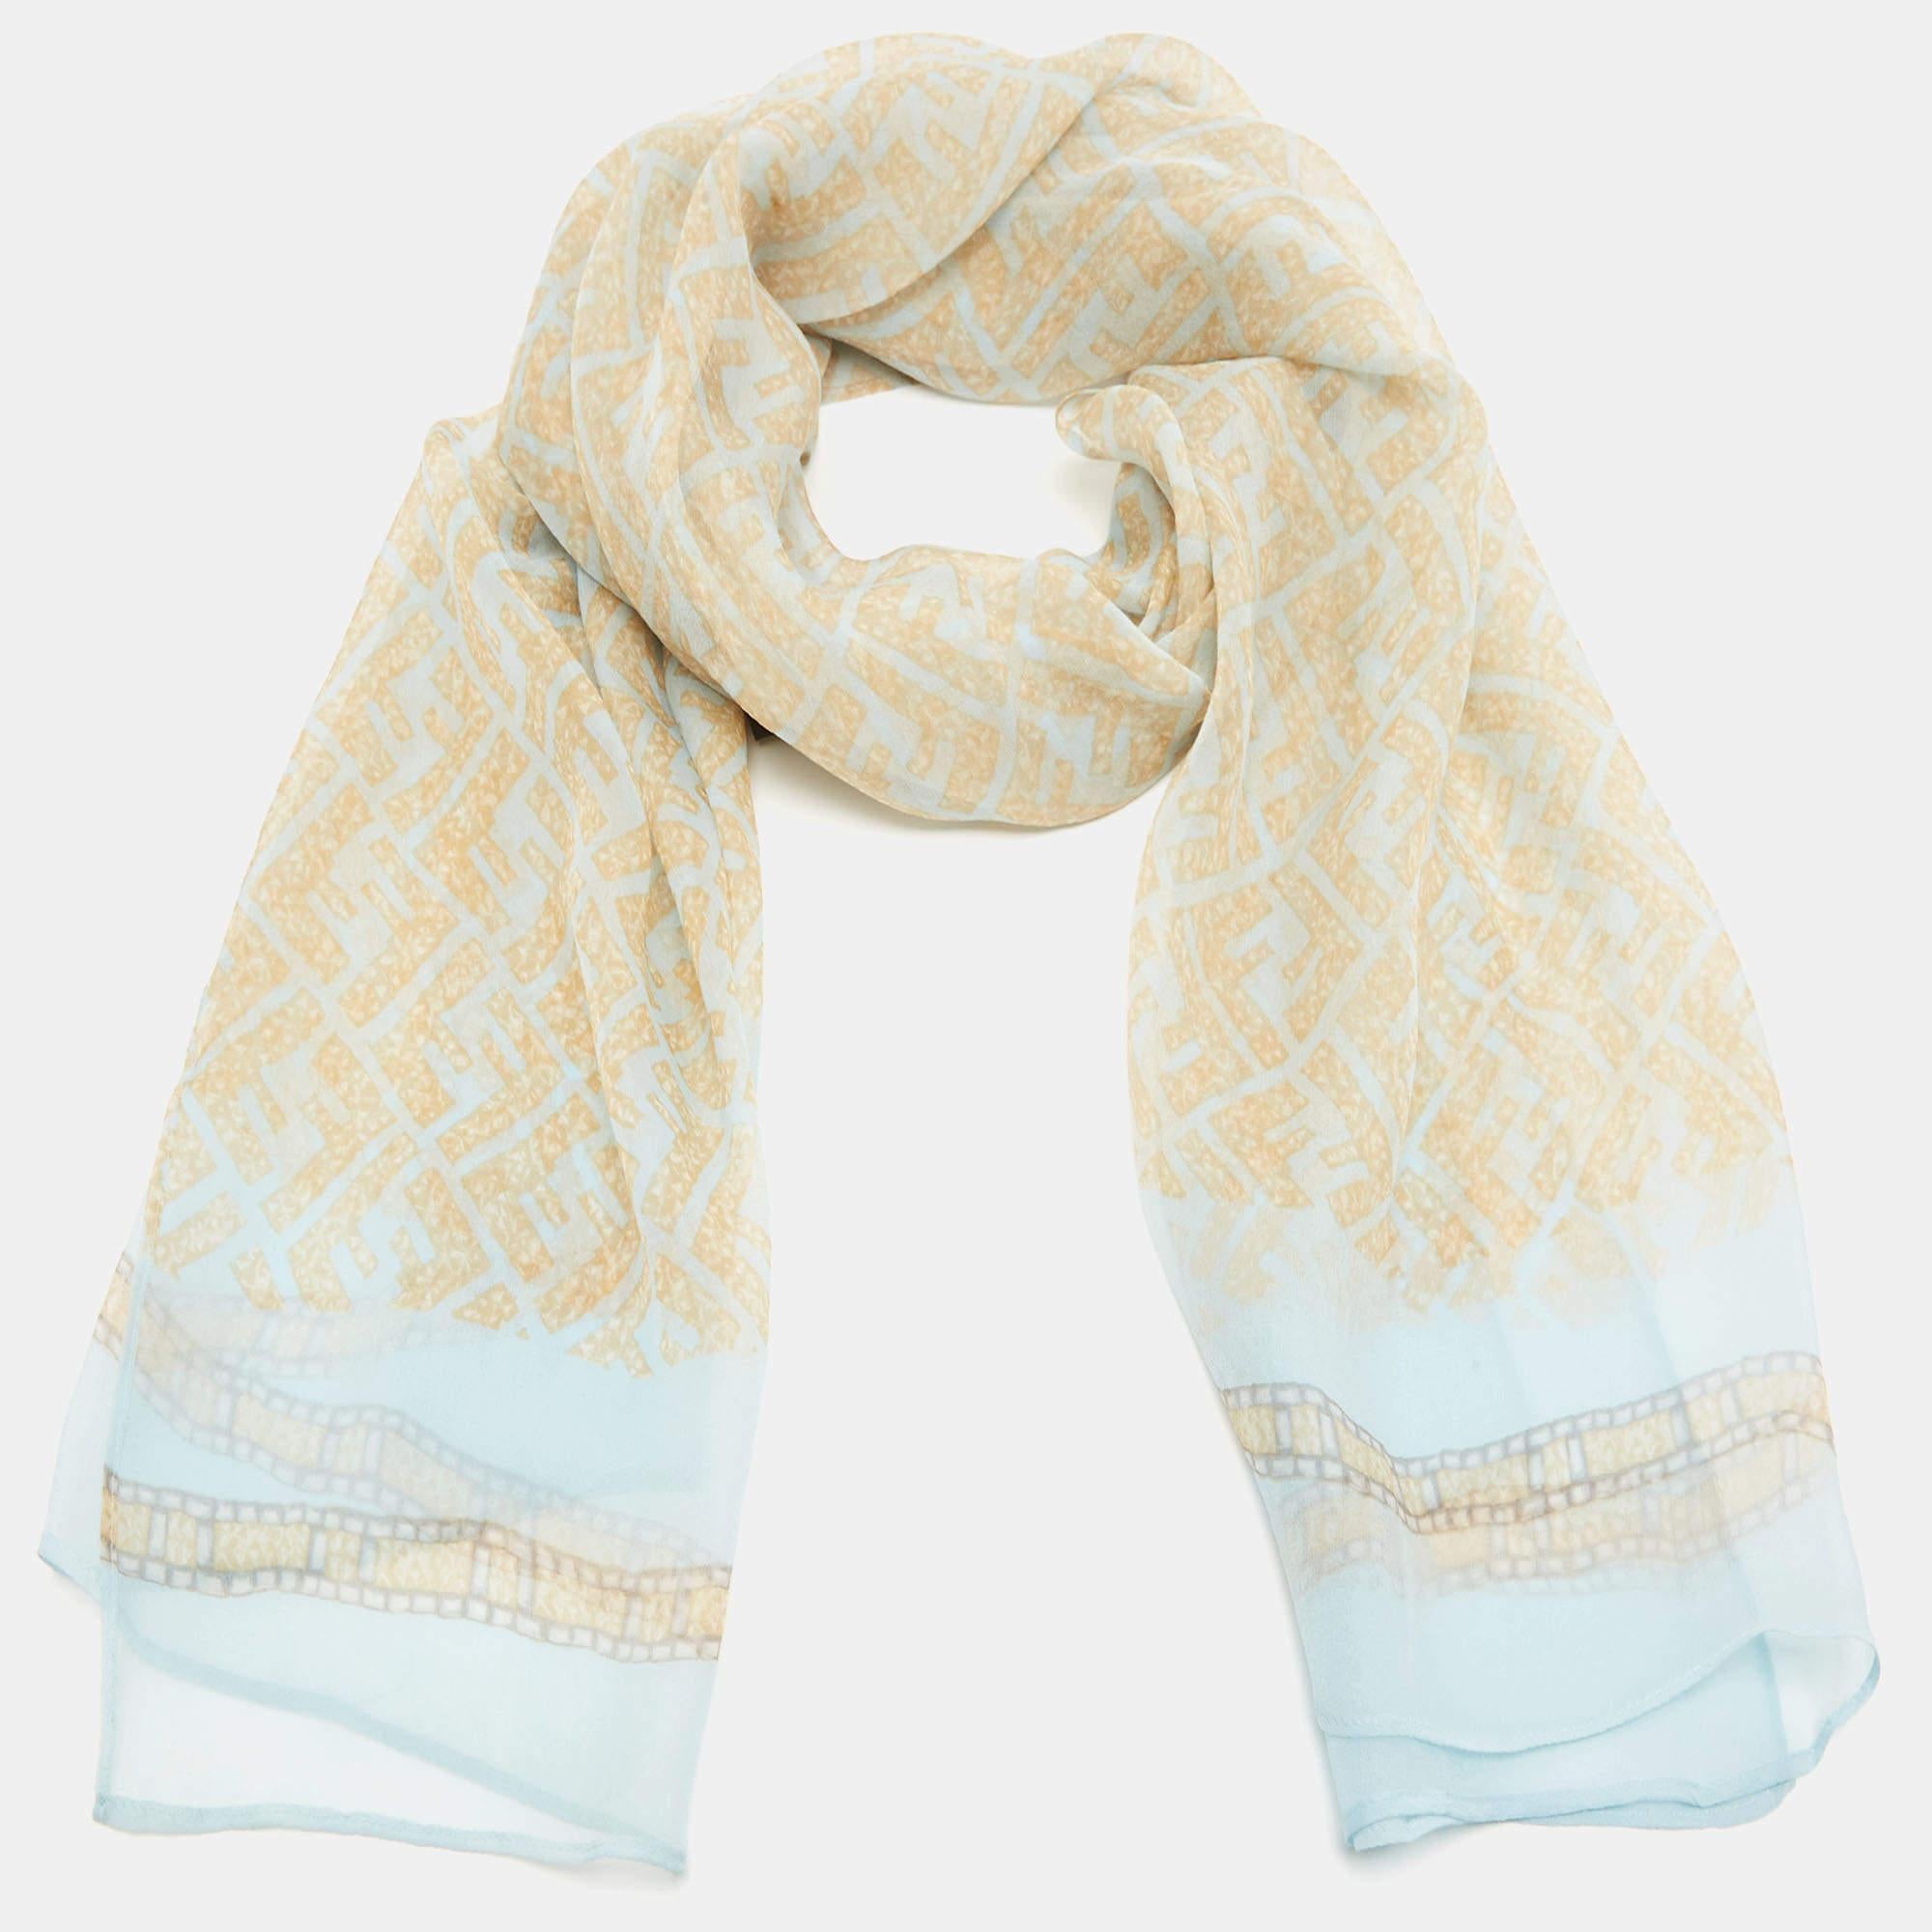 Made from quality fabric, this Fendi scarf is gorgeous. It is easy to style and luxurious in appeal.

